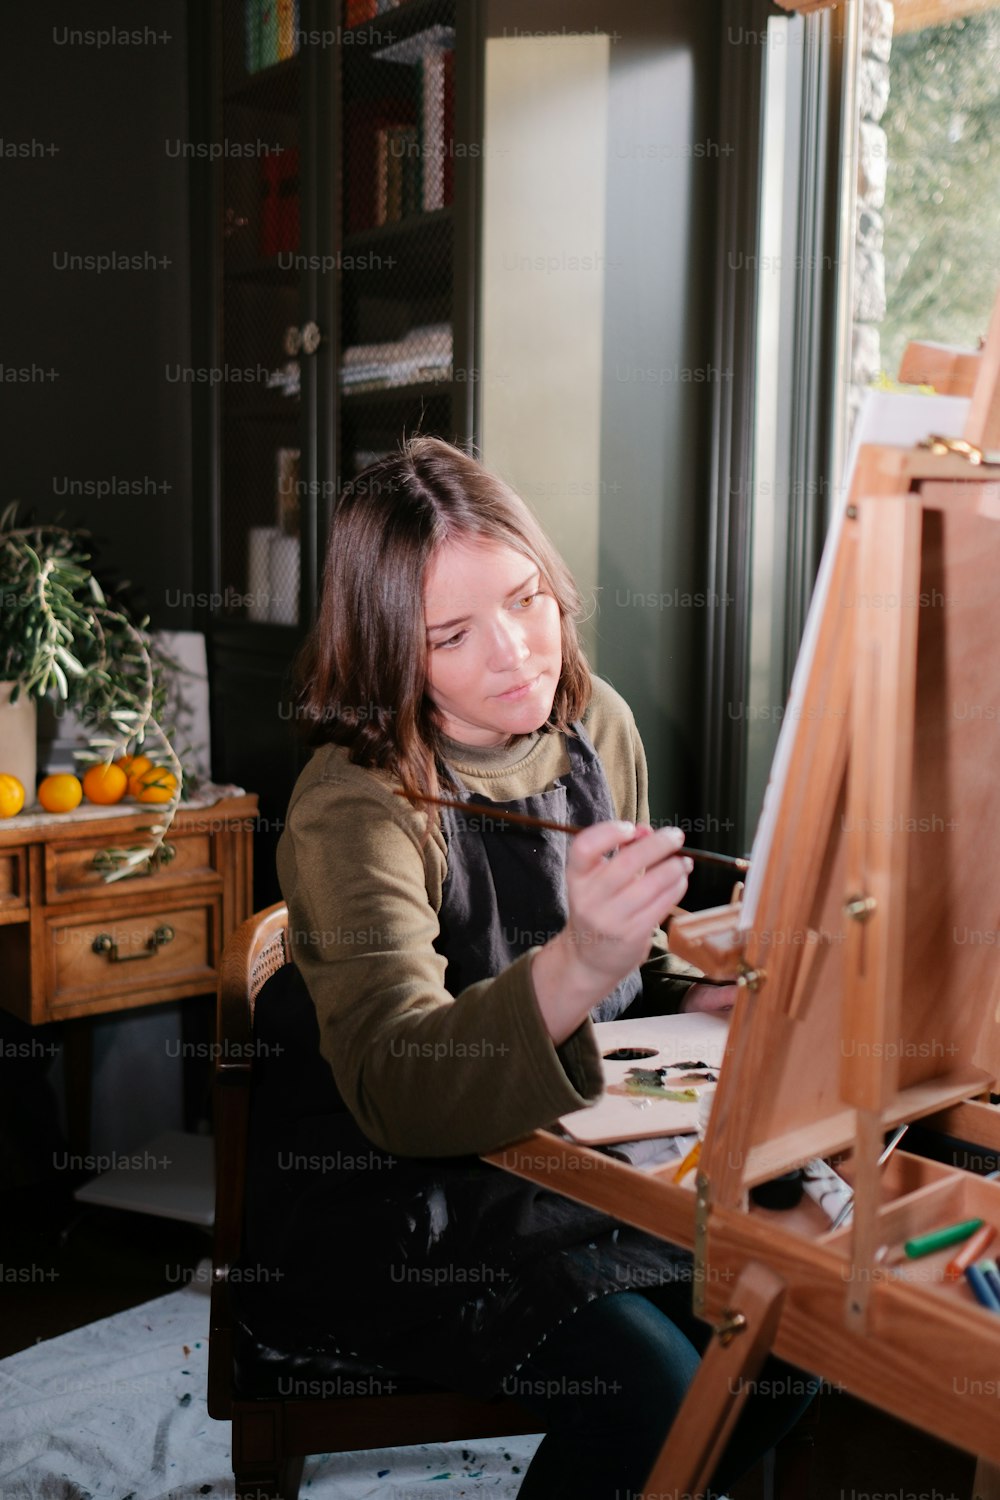 a woman sitting in front of a easel painting